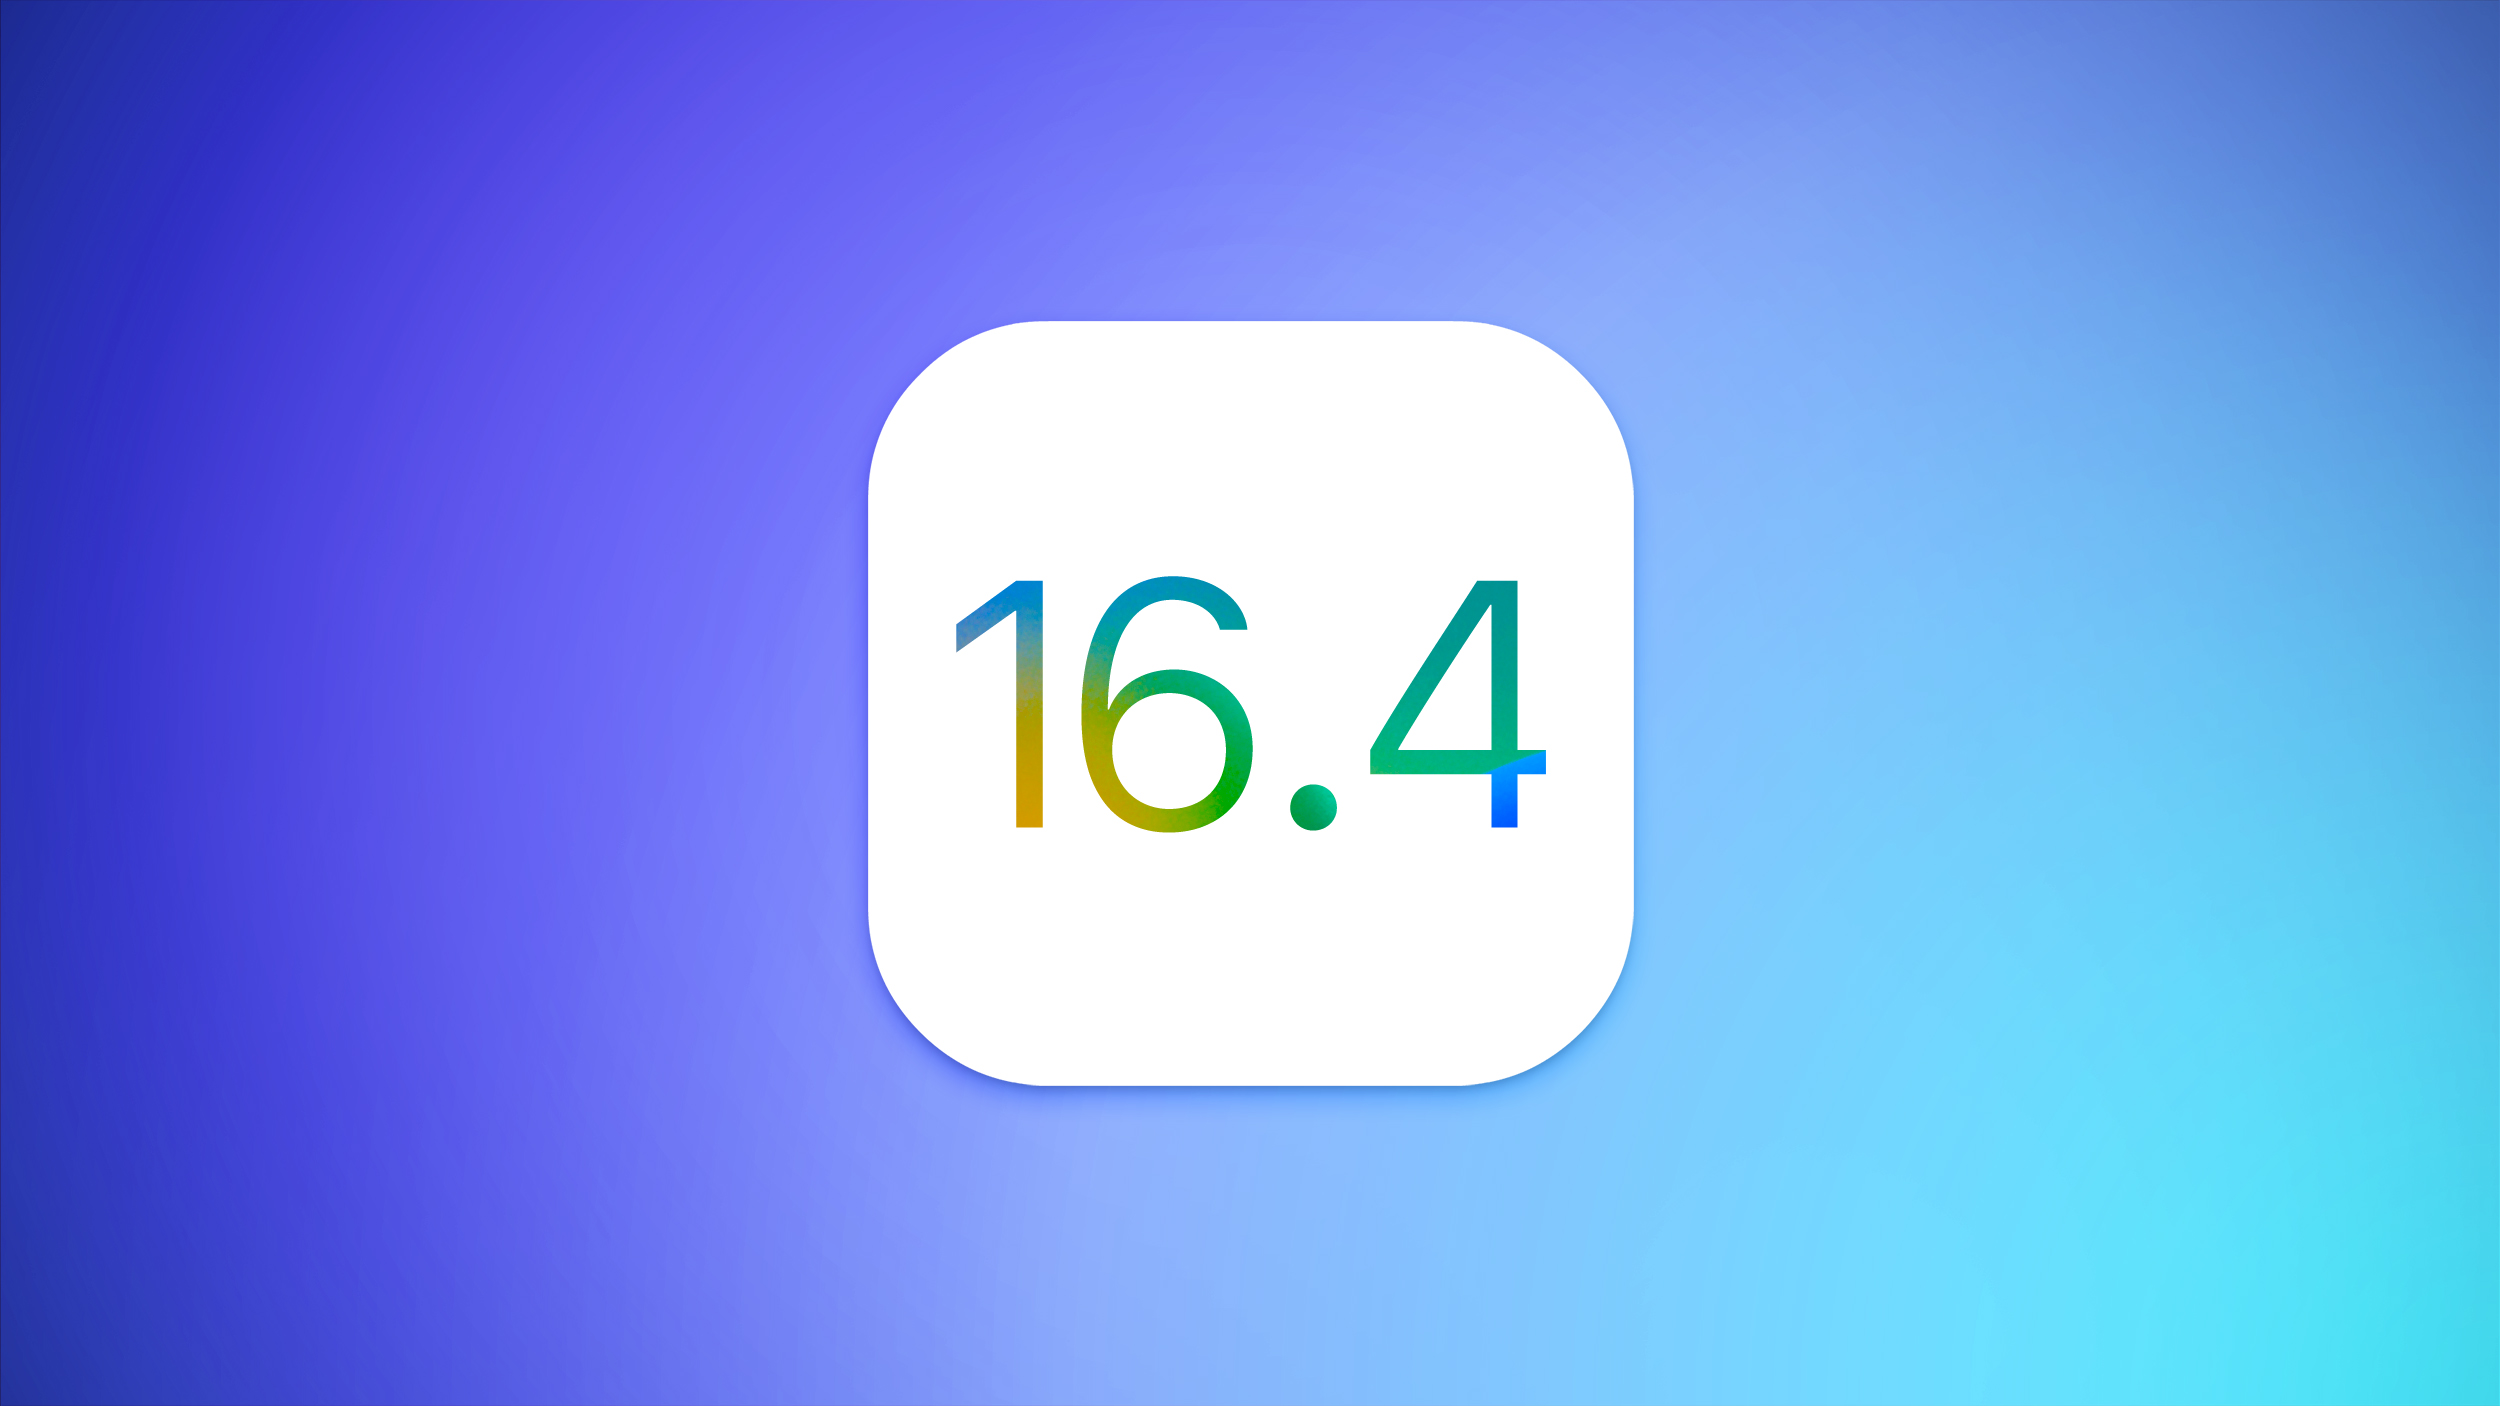 When Will the iOS 16.4 Beta Be Released?